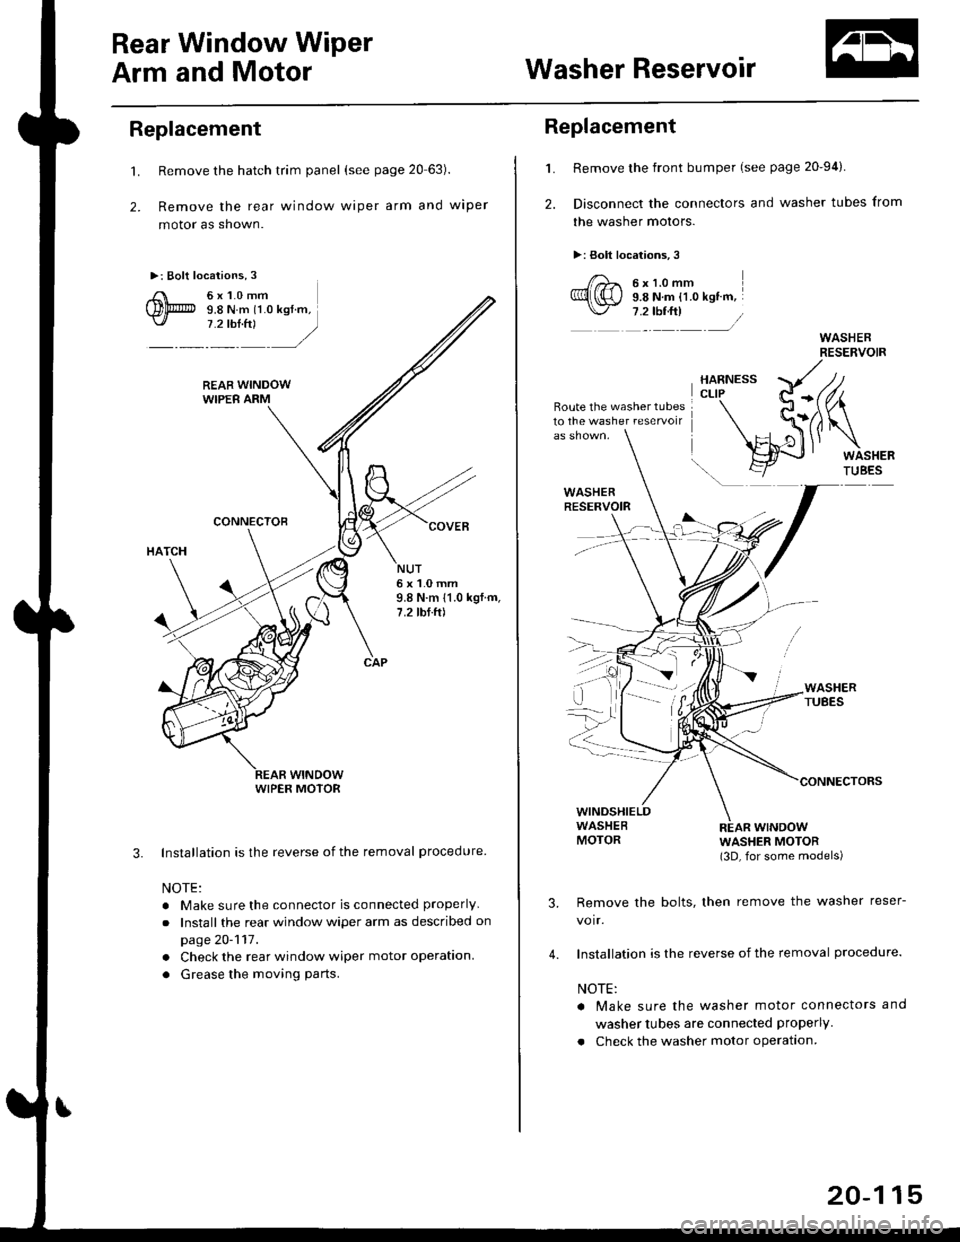 HONDA CIVIC 1996 6.G Workshop Manual Rear Window Wiper
Arm and MotorWasher Reservoir
Replacement
t.
2.
Remove the hatch trim panel (see page 20 63).
Remove the rear window wiper arm and wiper
motor as shown.
Installation is the reverse 